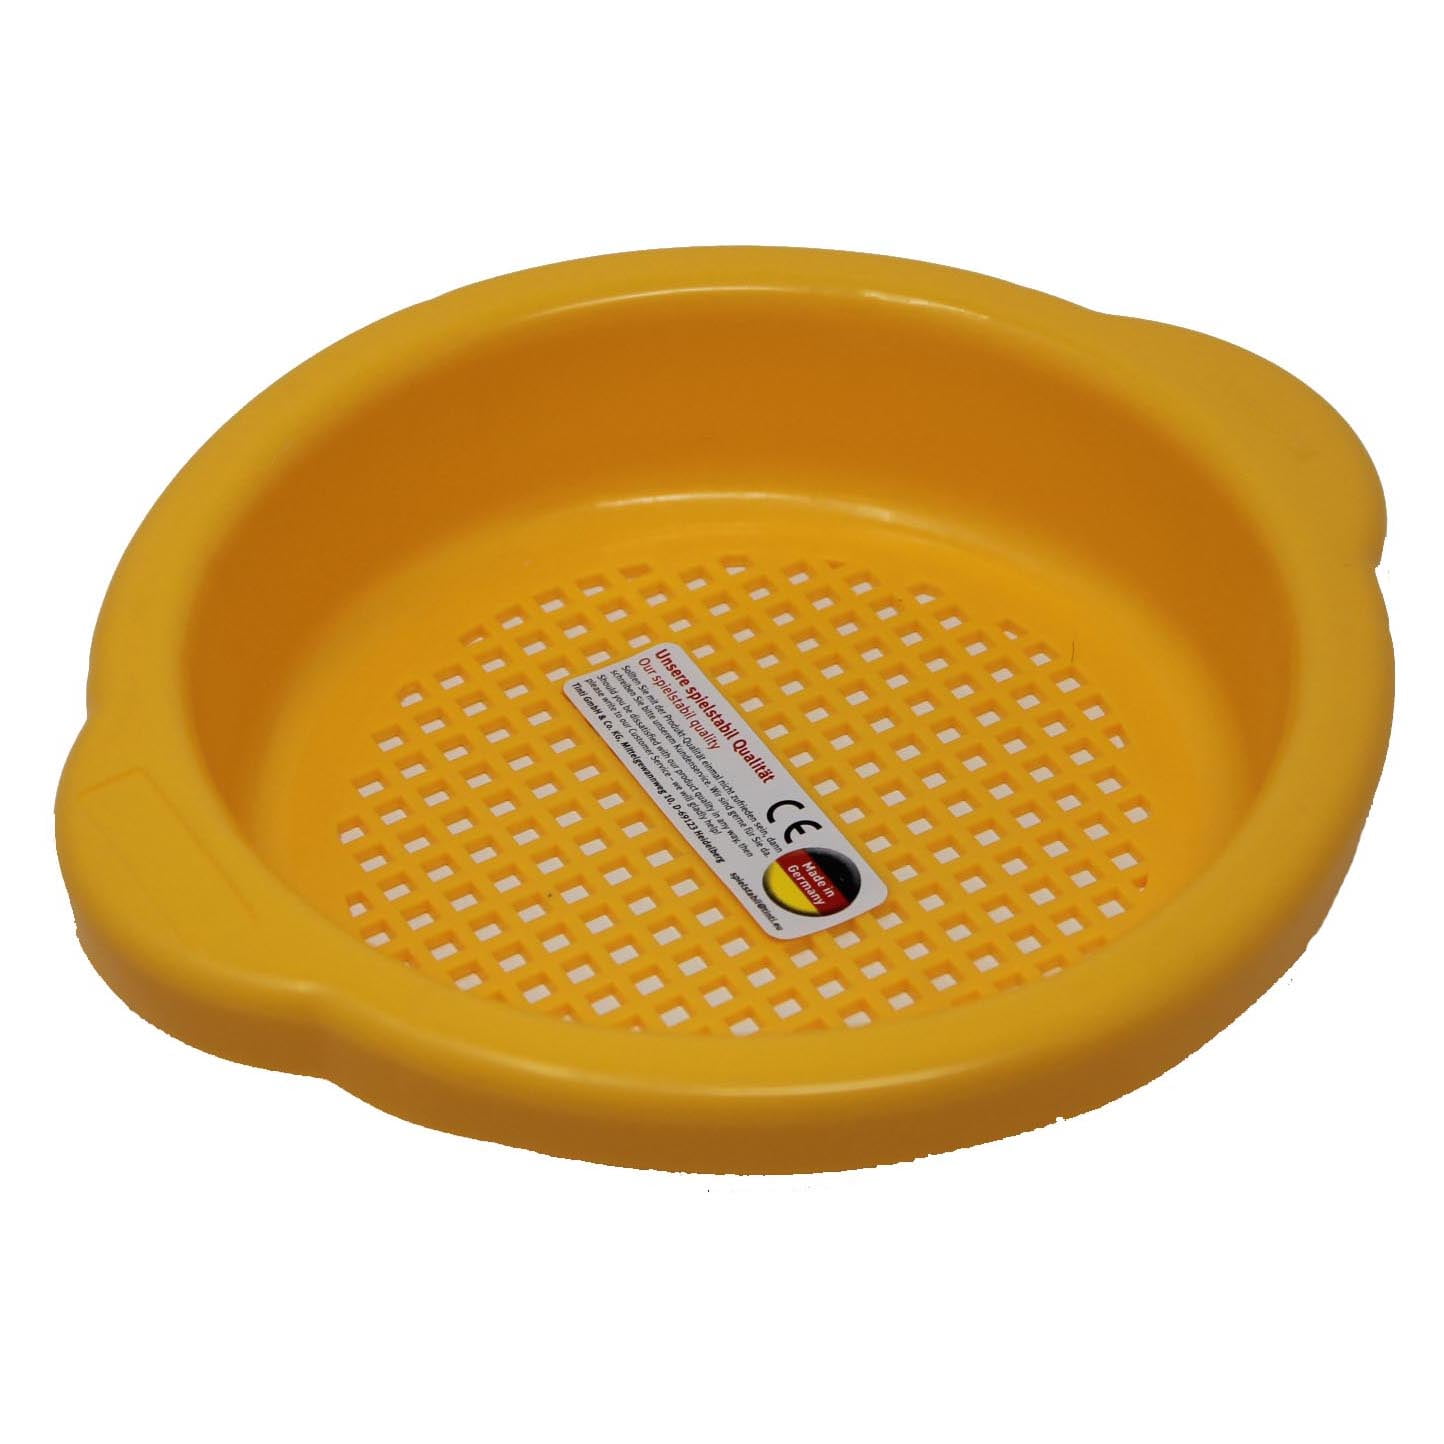 Red , Blue , Yellow Set for Beach Play Large Sand Sieves Meejaa 3pcs Beach Sand Sifter Sieves Sets